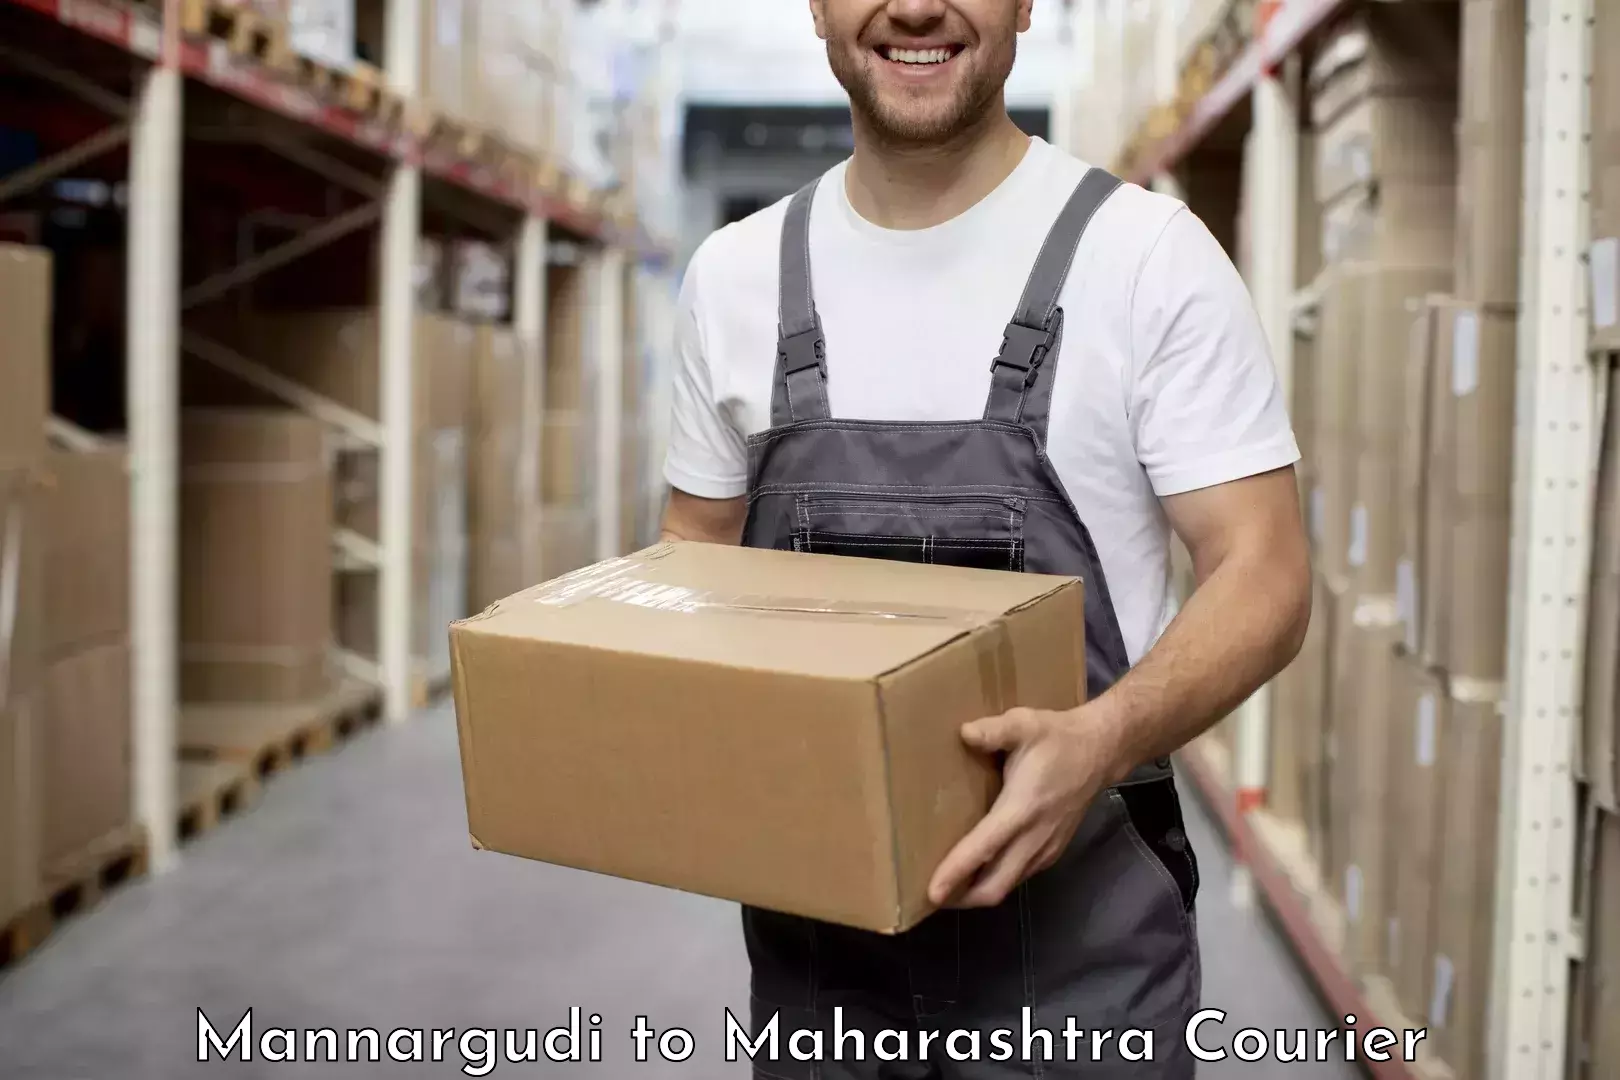 Reliable delivery network Mannargudi to Paratwada